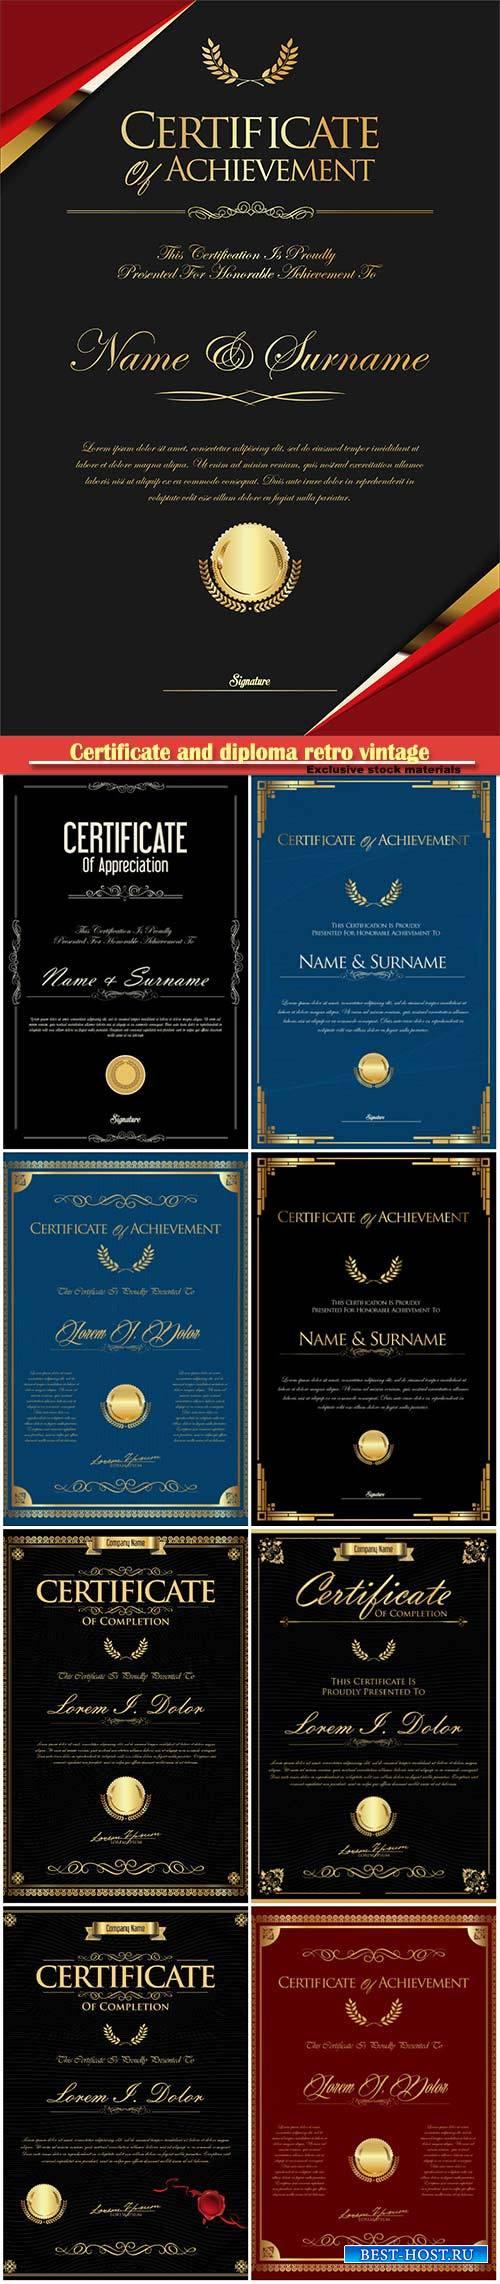 Certificate and diploma retro vintage vector template